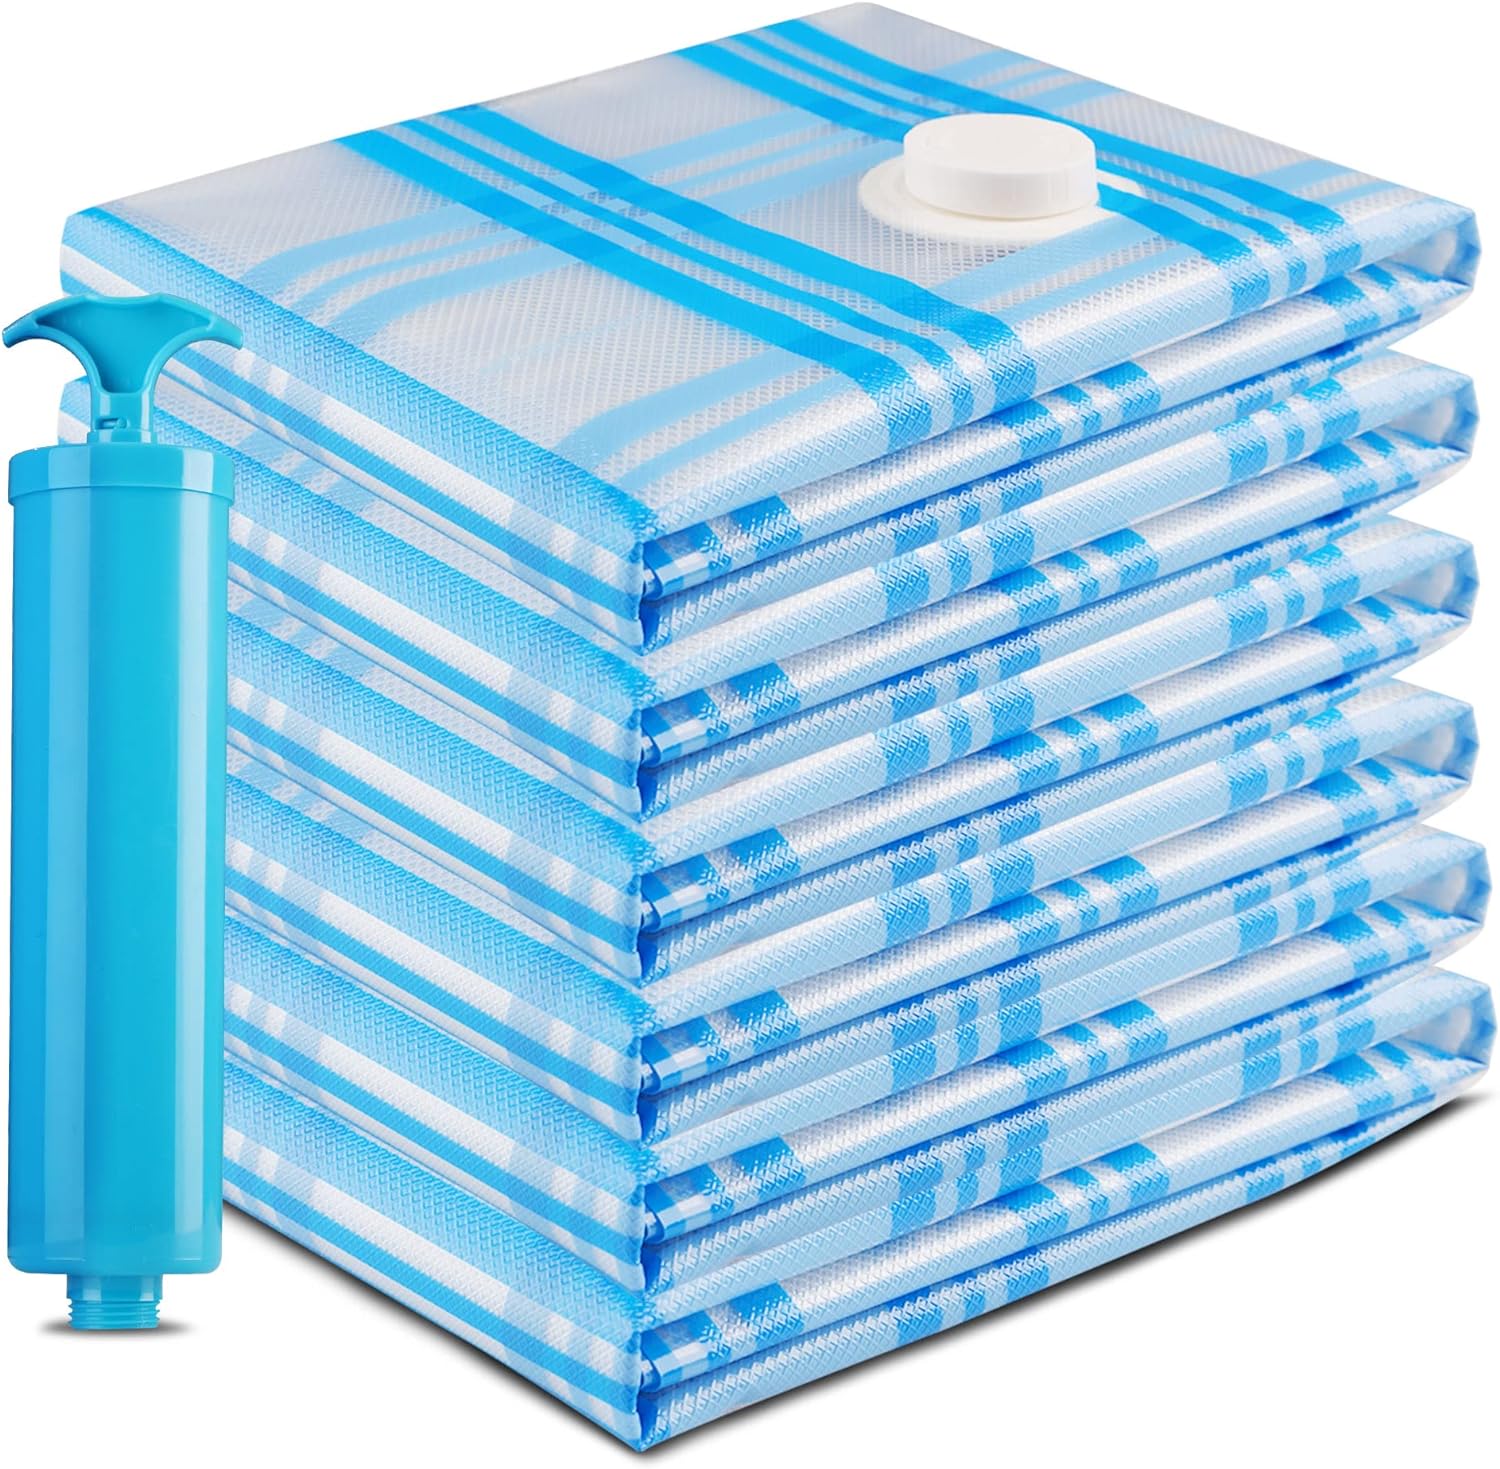 Vacuum Storage Bags, 6 Jumbo Space Saver Vacuum Seal Storage Bags for Clothes, Clothing, Comforters and Blankets